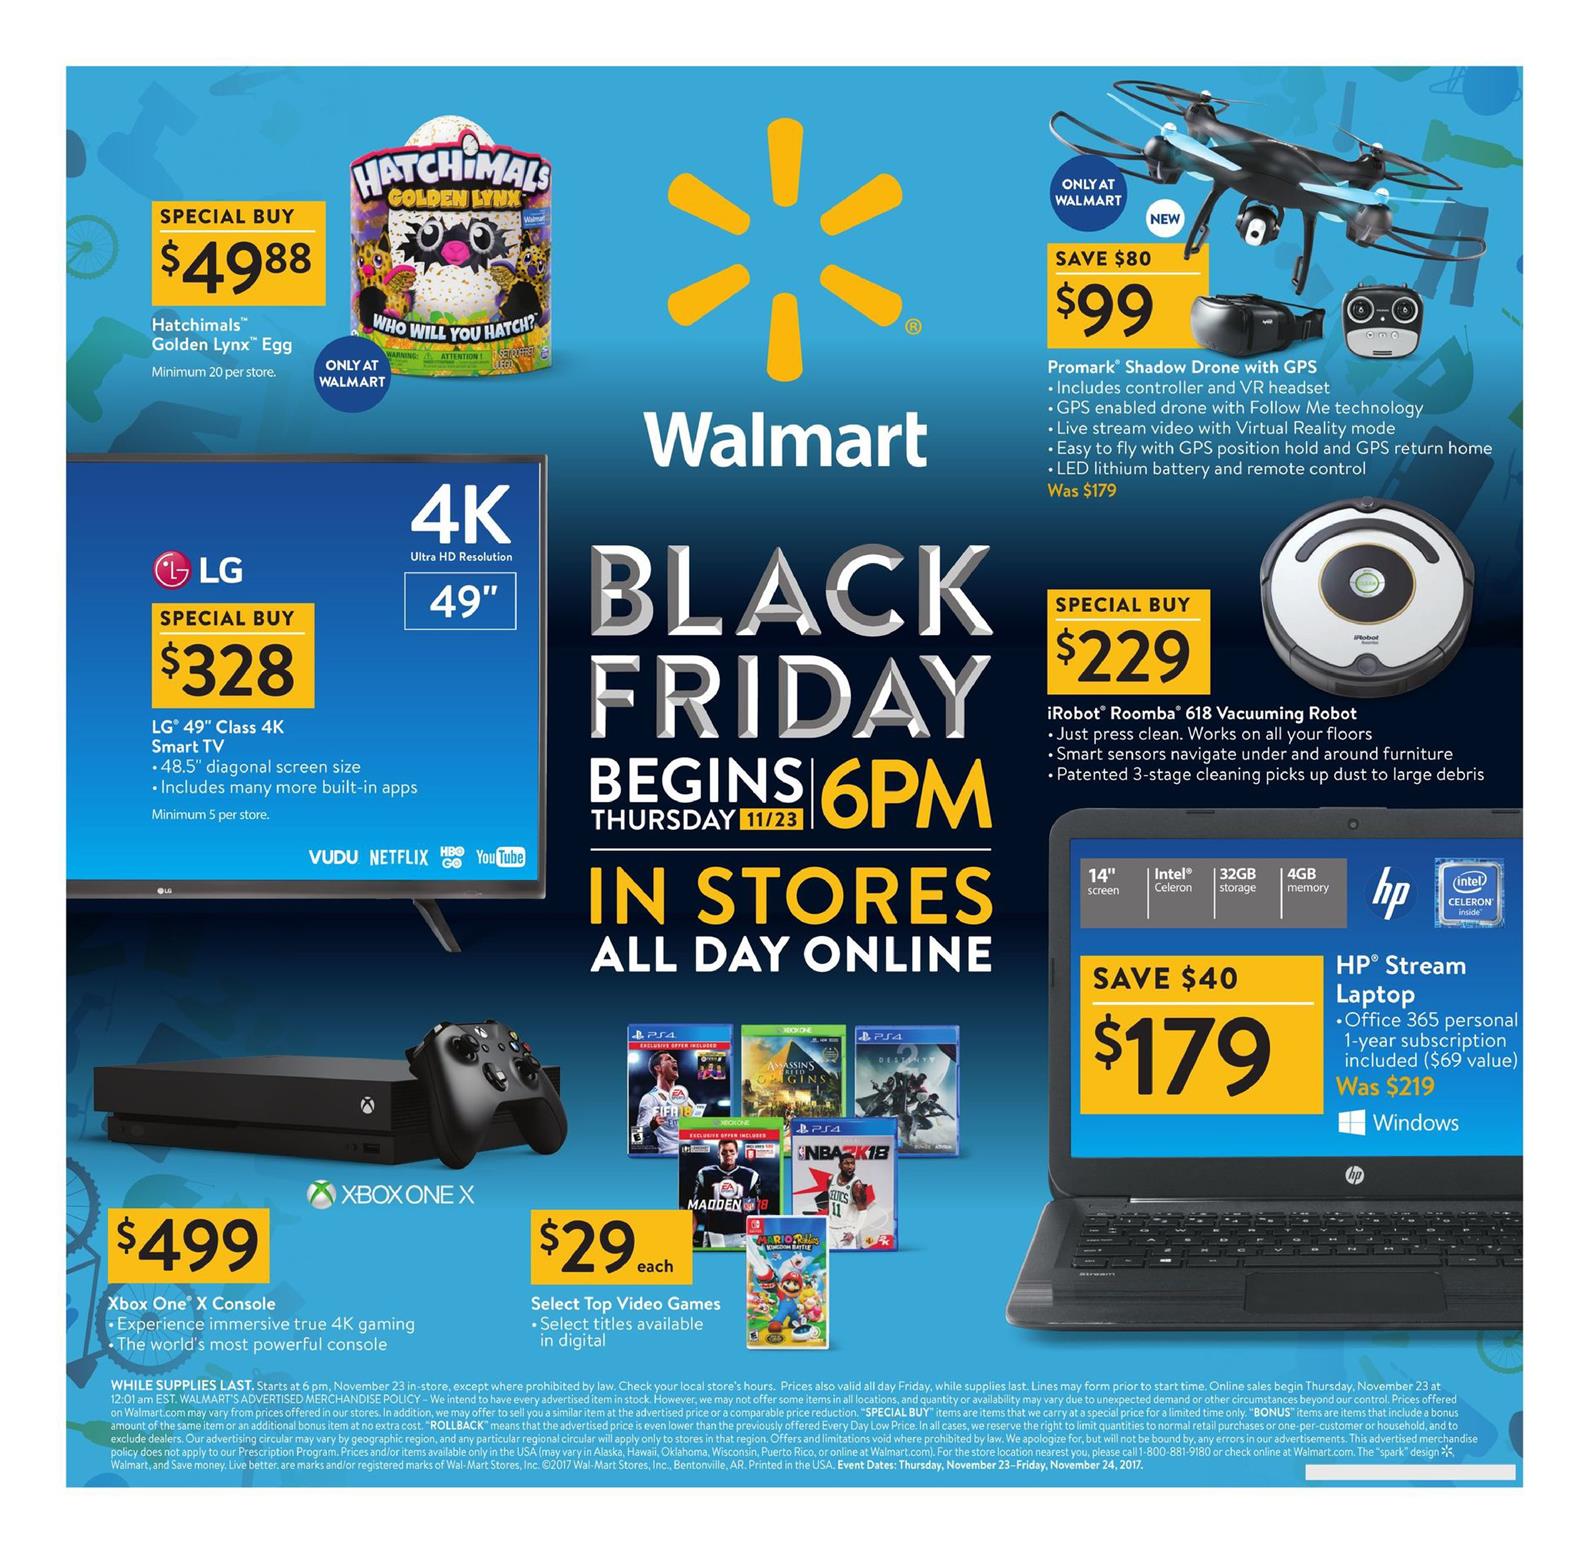 Walmart Black Friday Ad 2017 - WeeklyAds2 - How Are Black Friday Deals Possible